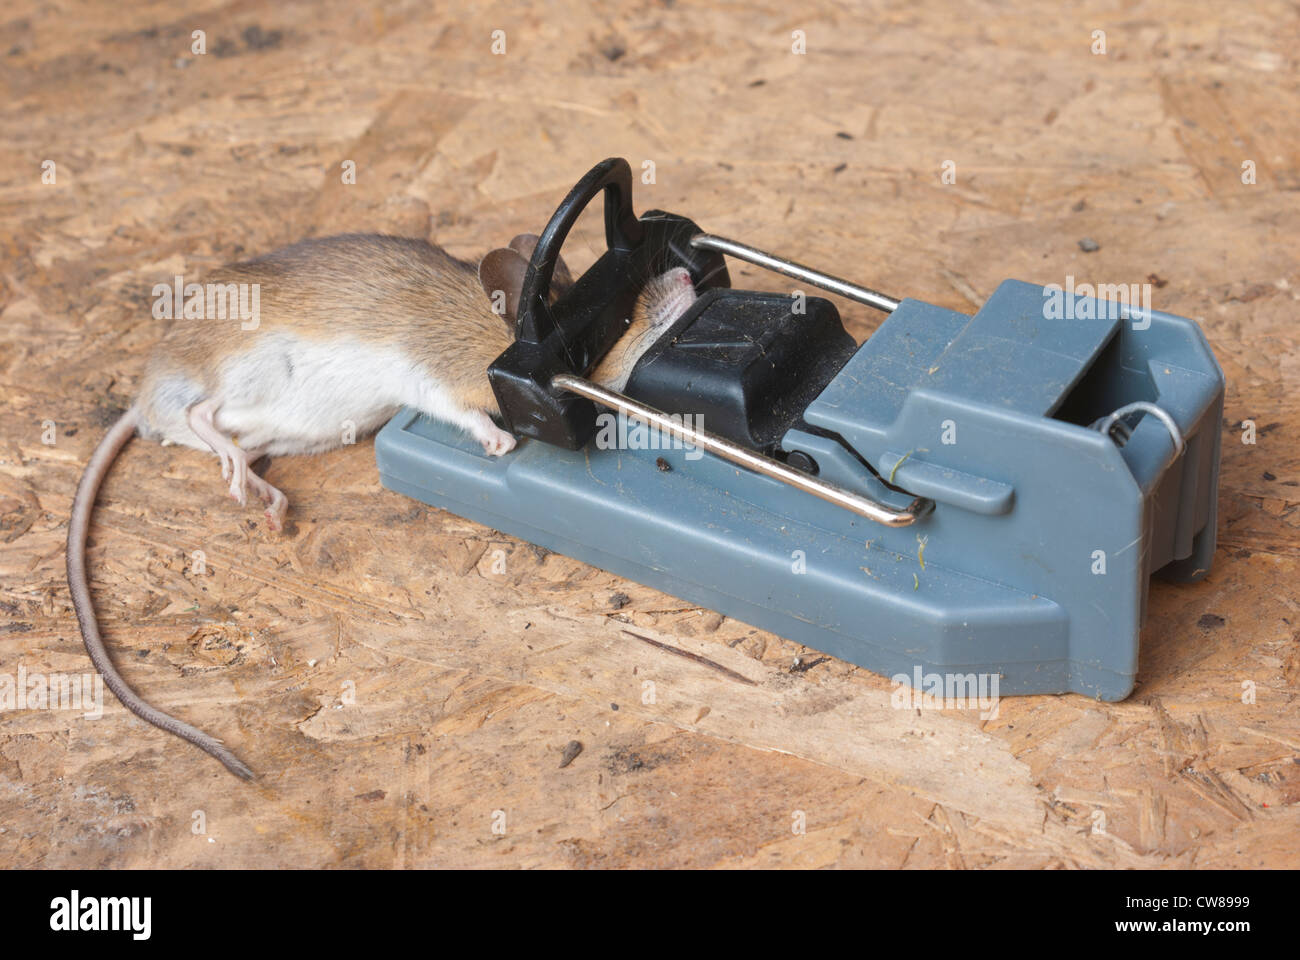 https://c8.alamy.com/comp/CW8999/a-mouse-caught-in-a-trap-CW8999.jpg